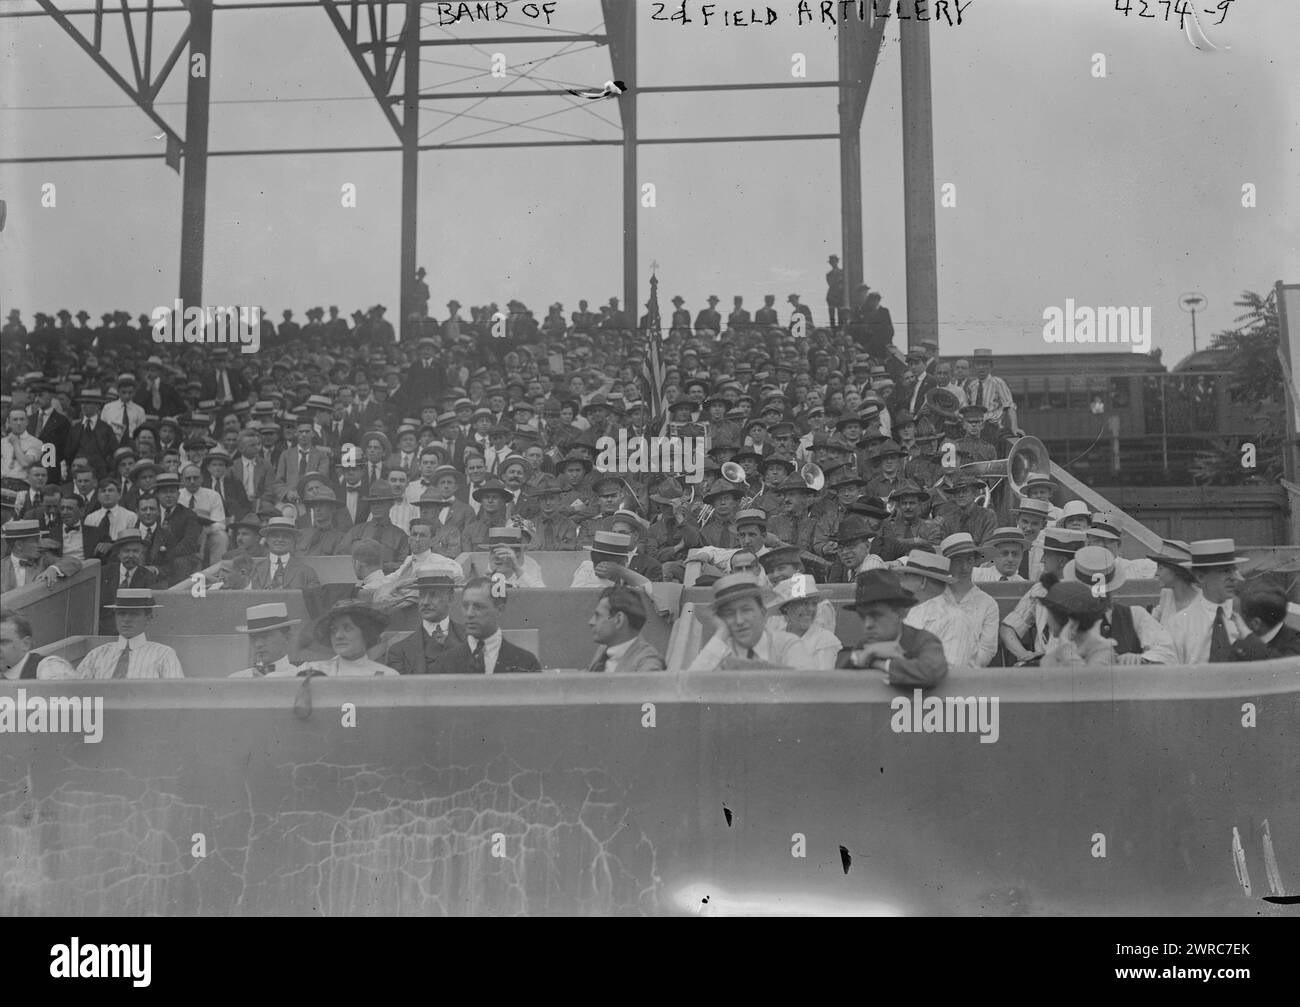 Band of 2d Field Artillery, Photograph shows the band of the 2nd Field Artillery attending a baseball game at Ebbets Field, Brooklyn, New York on July 24, 1917., 1917 July 24, Glass negatives, 1 negative: glass Stock Photo